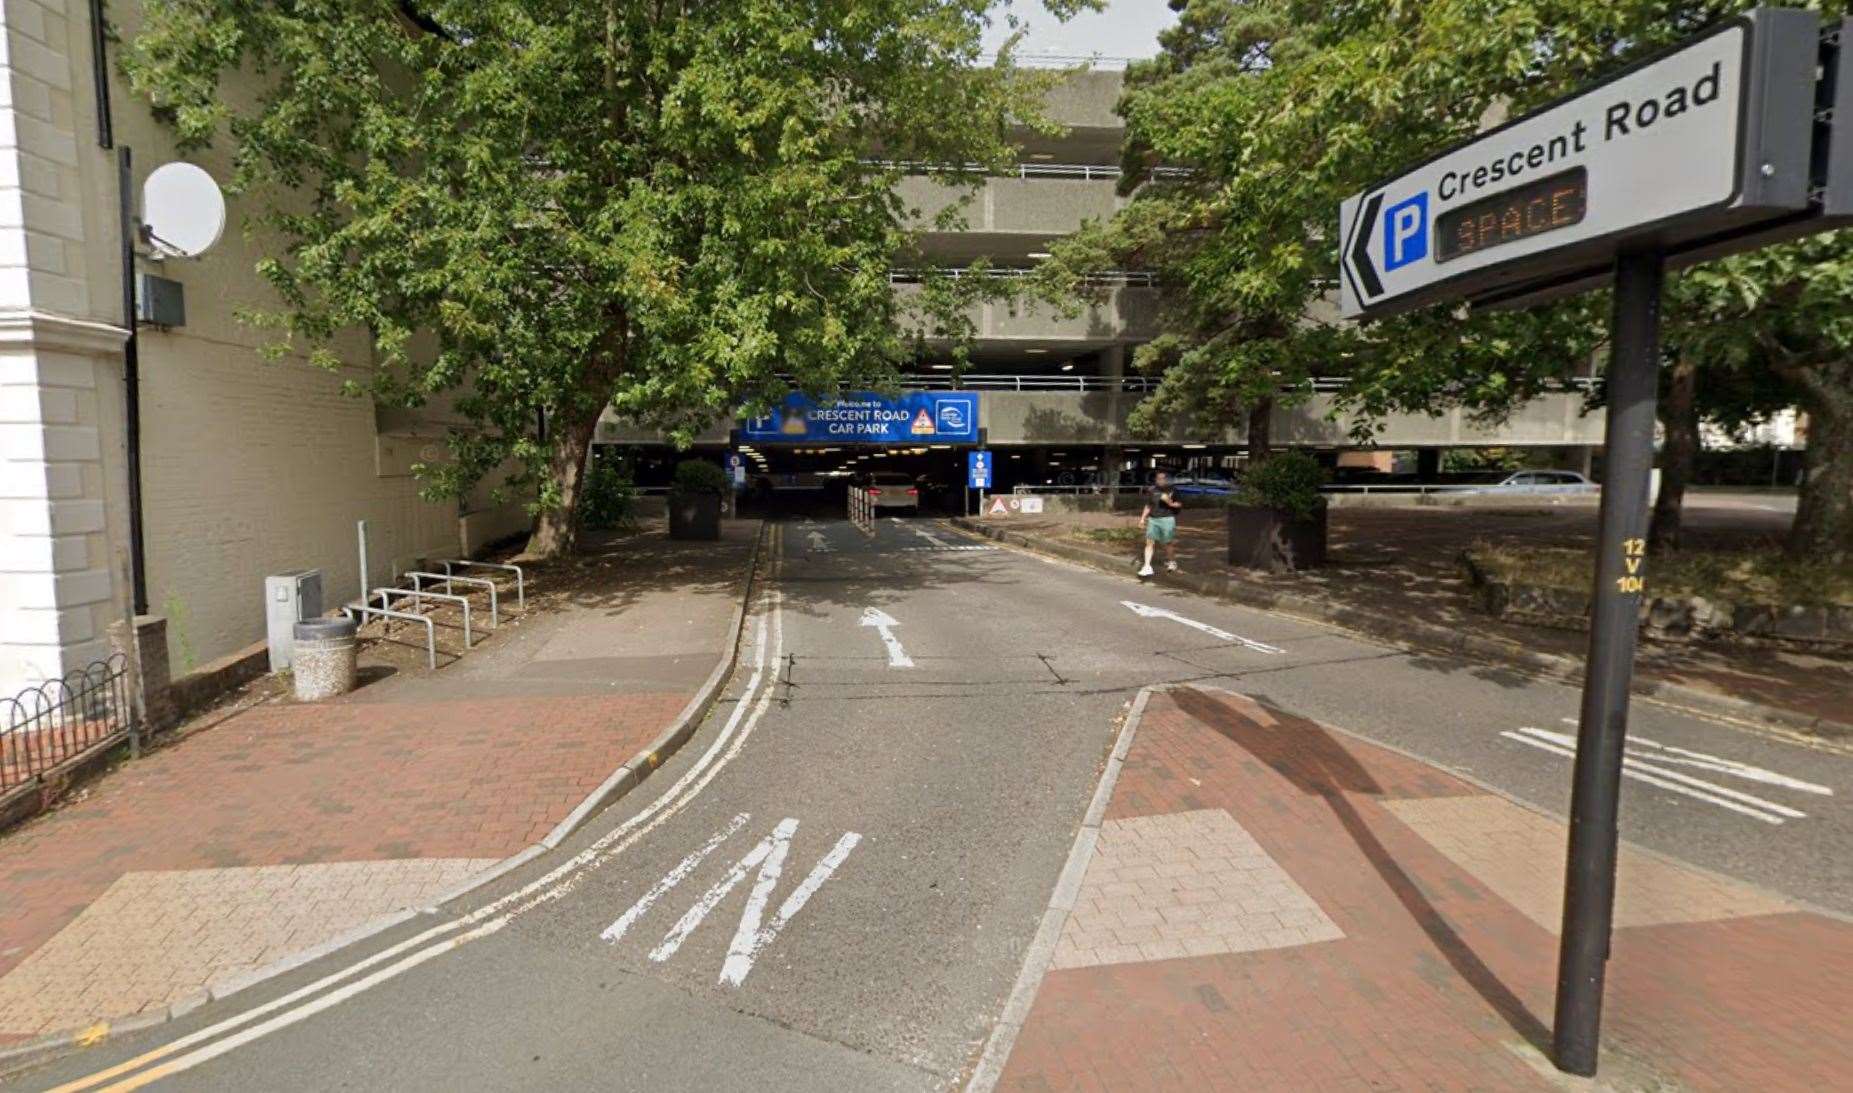 A man was allegedly spotted stealing items from a BMW boot in Crescent Road Car Park, Tunbridge Wells. Picture: Google